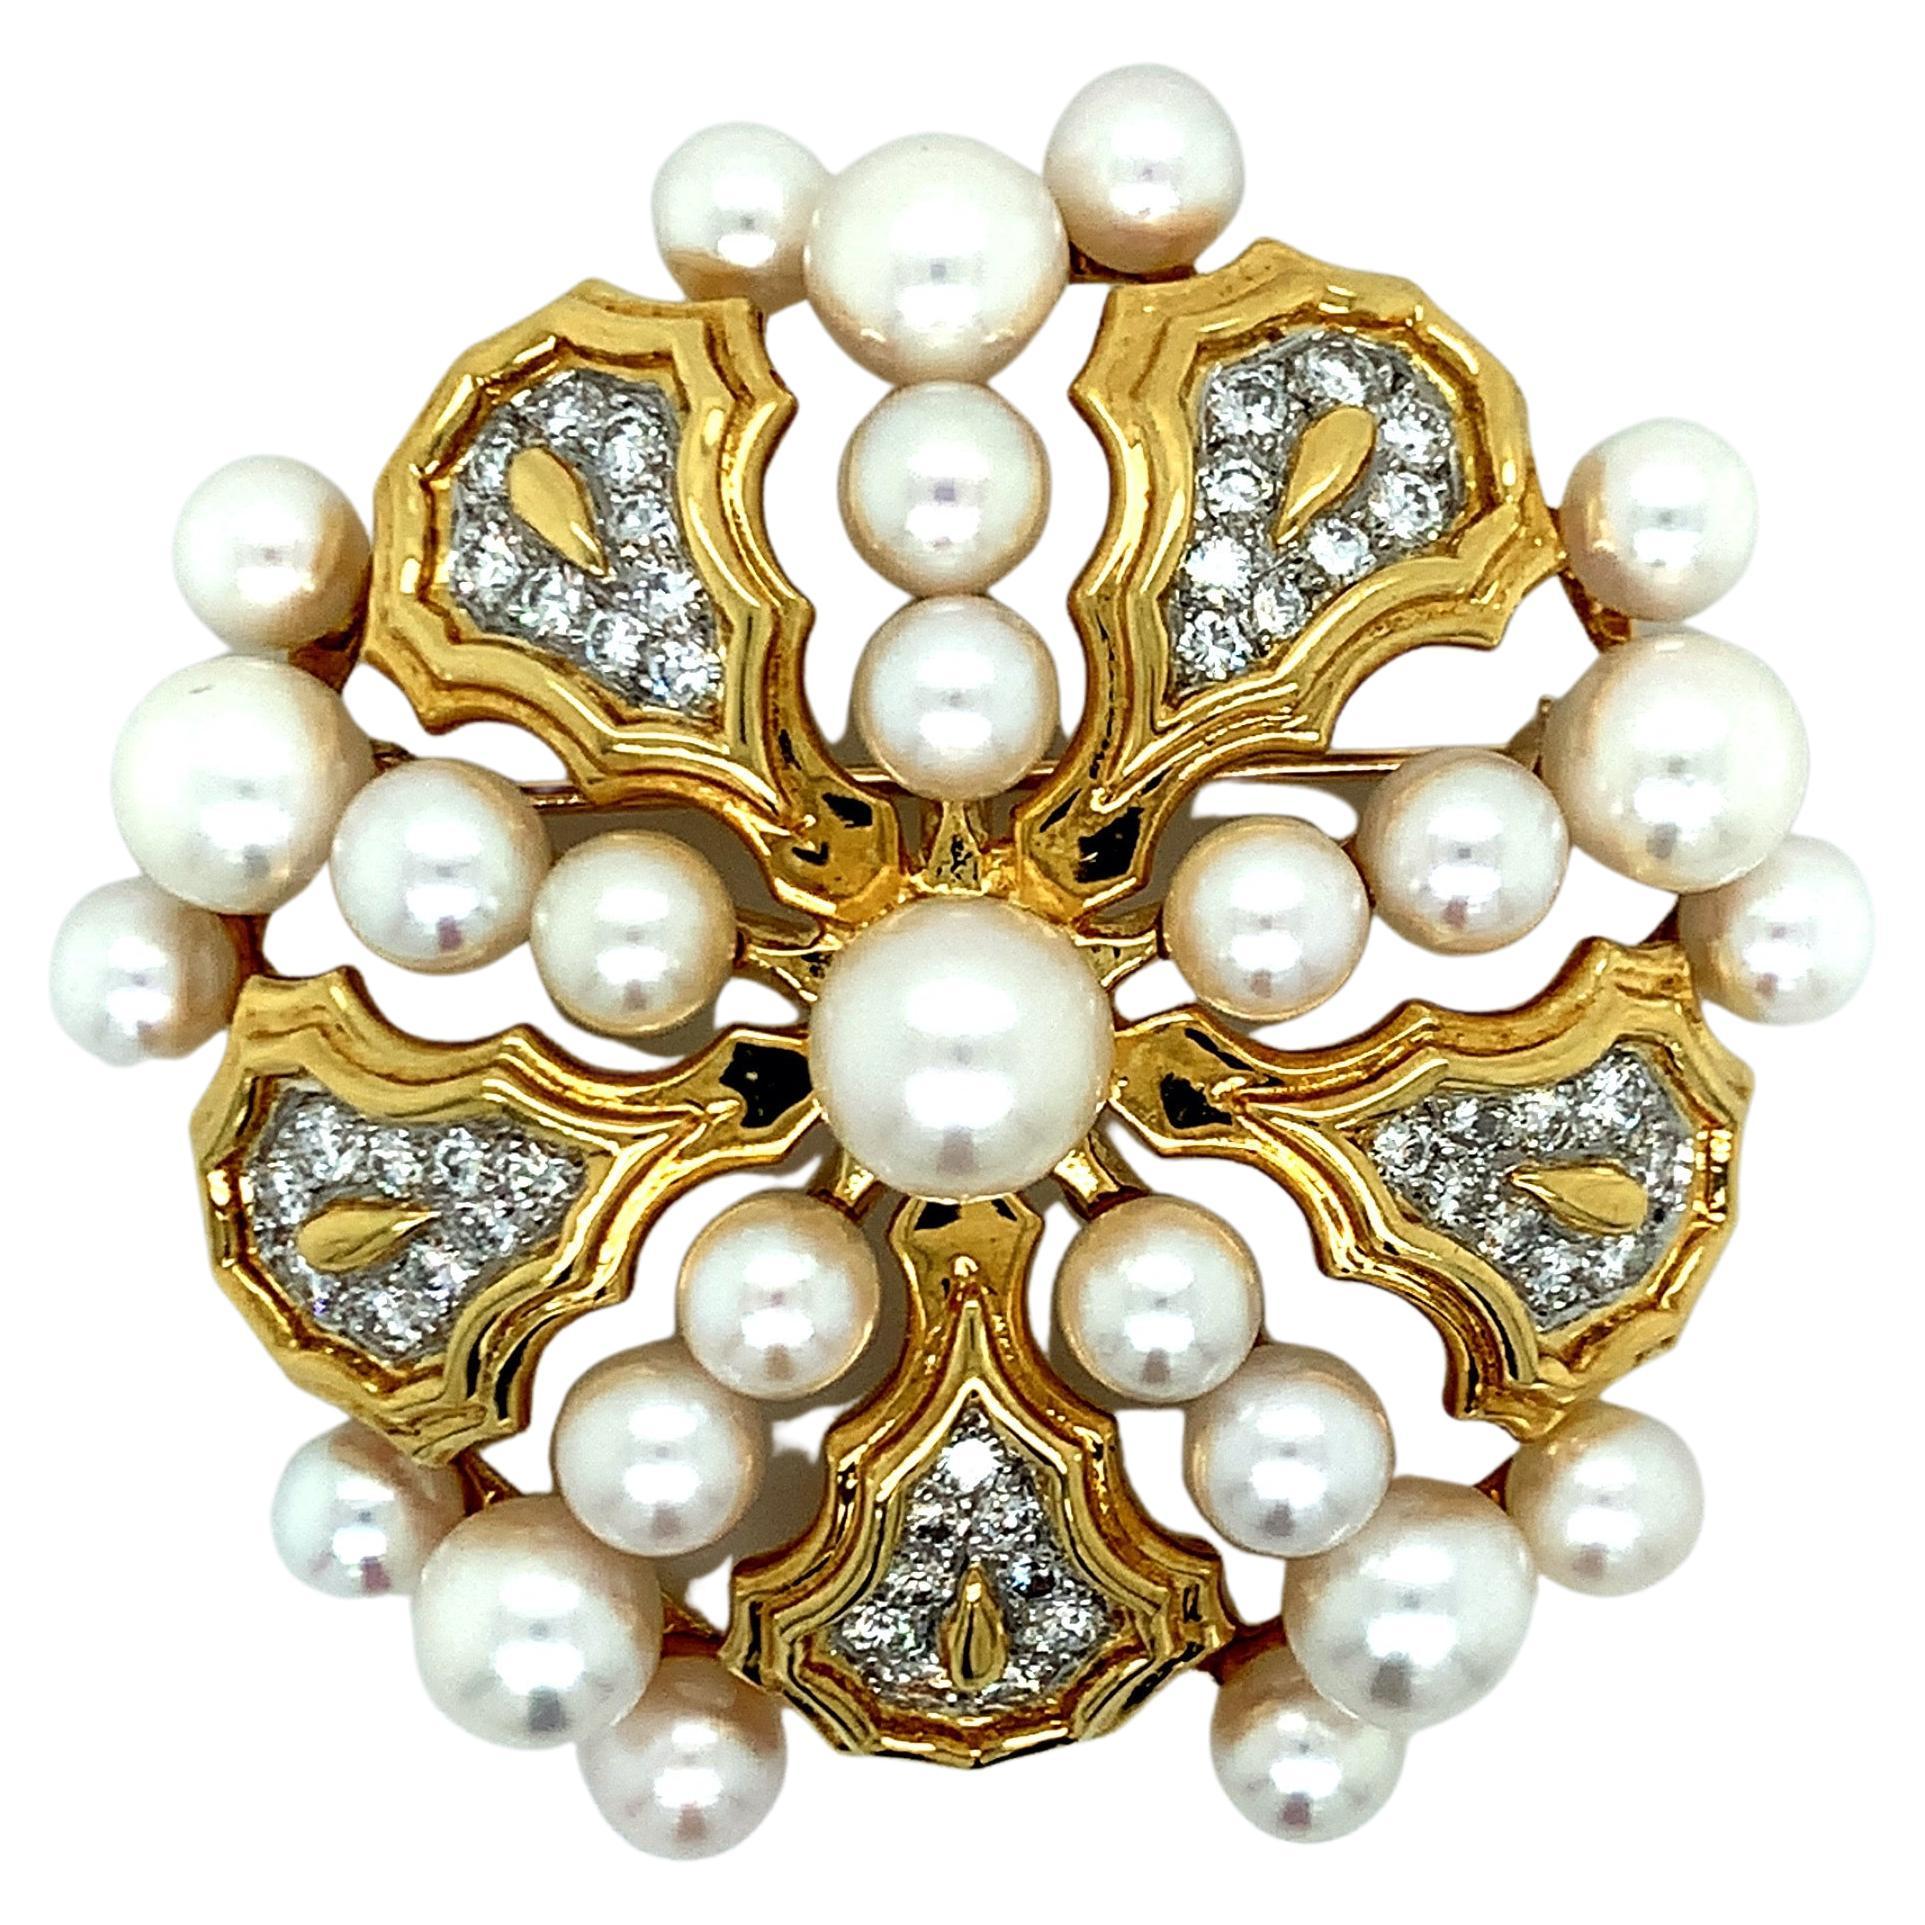 Tiffany & Co. Gold Diamond and Pearl Brooch